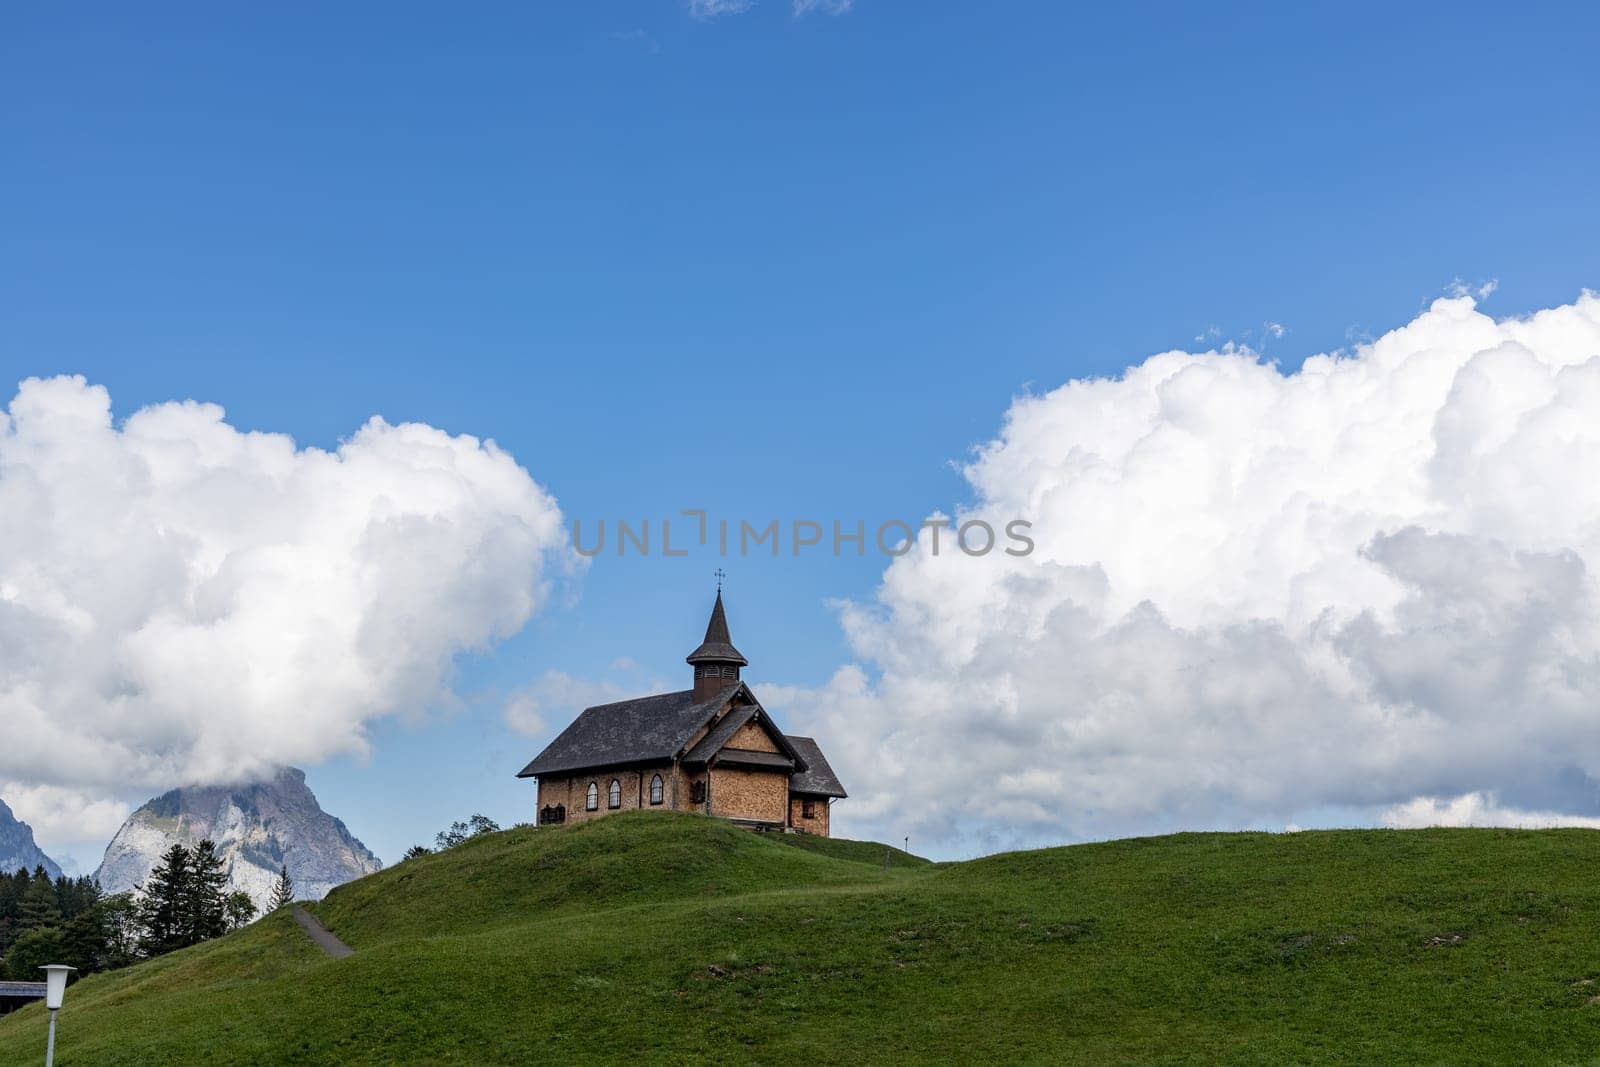 Beautiful view of the church standing on a green hill against the backdrop of mountains with clouds on a clear summer day in Fronalpstock Switzerland, close-up side view.